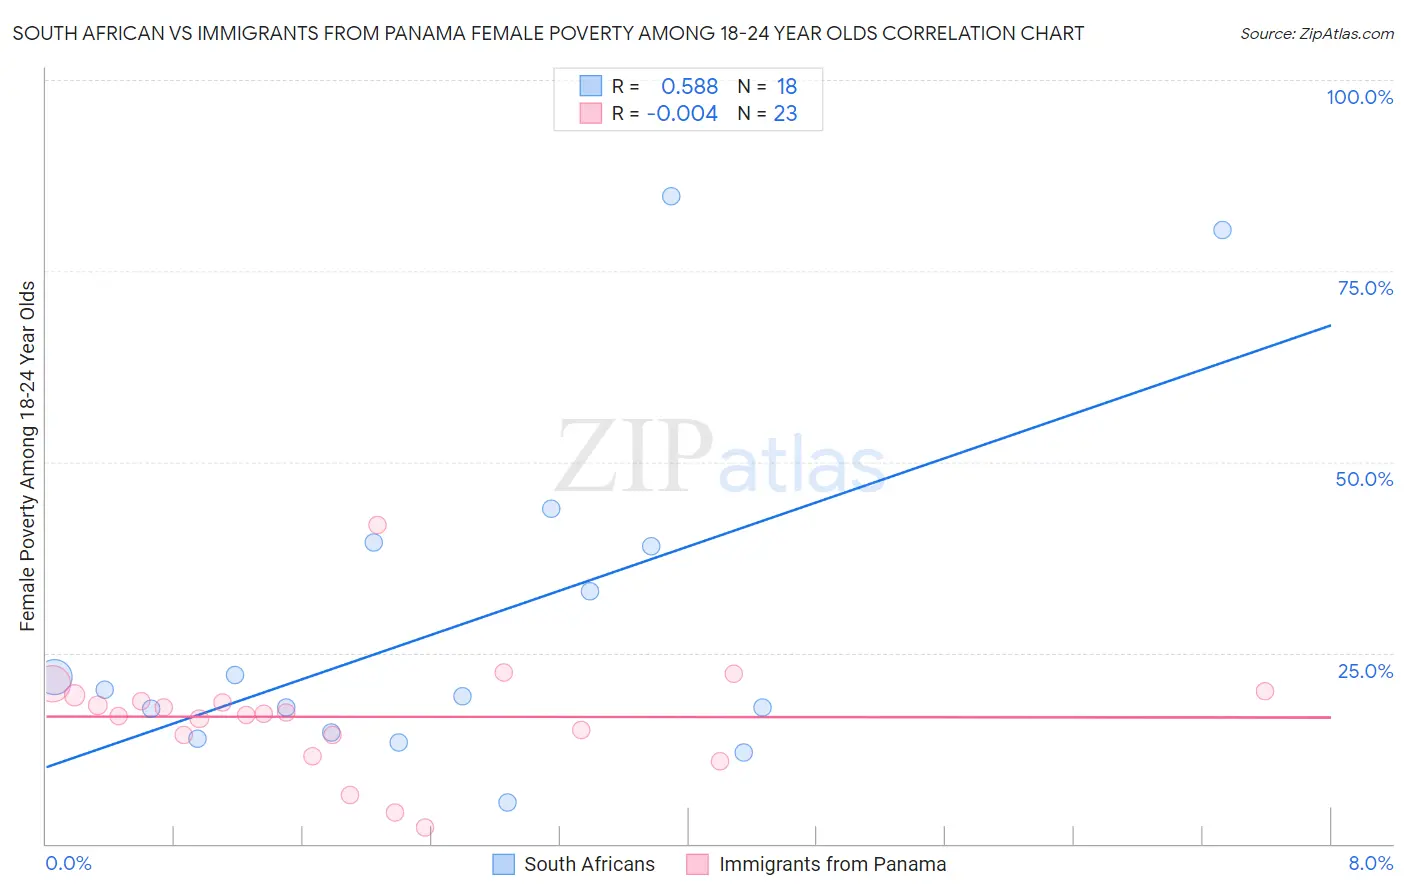 South African vs Immigrants from Panama Female Poverty Among 18-24 Year Olds